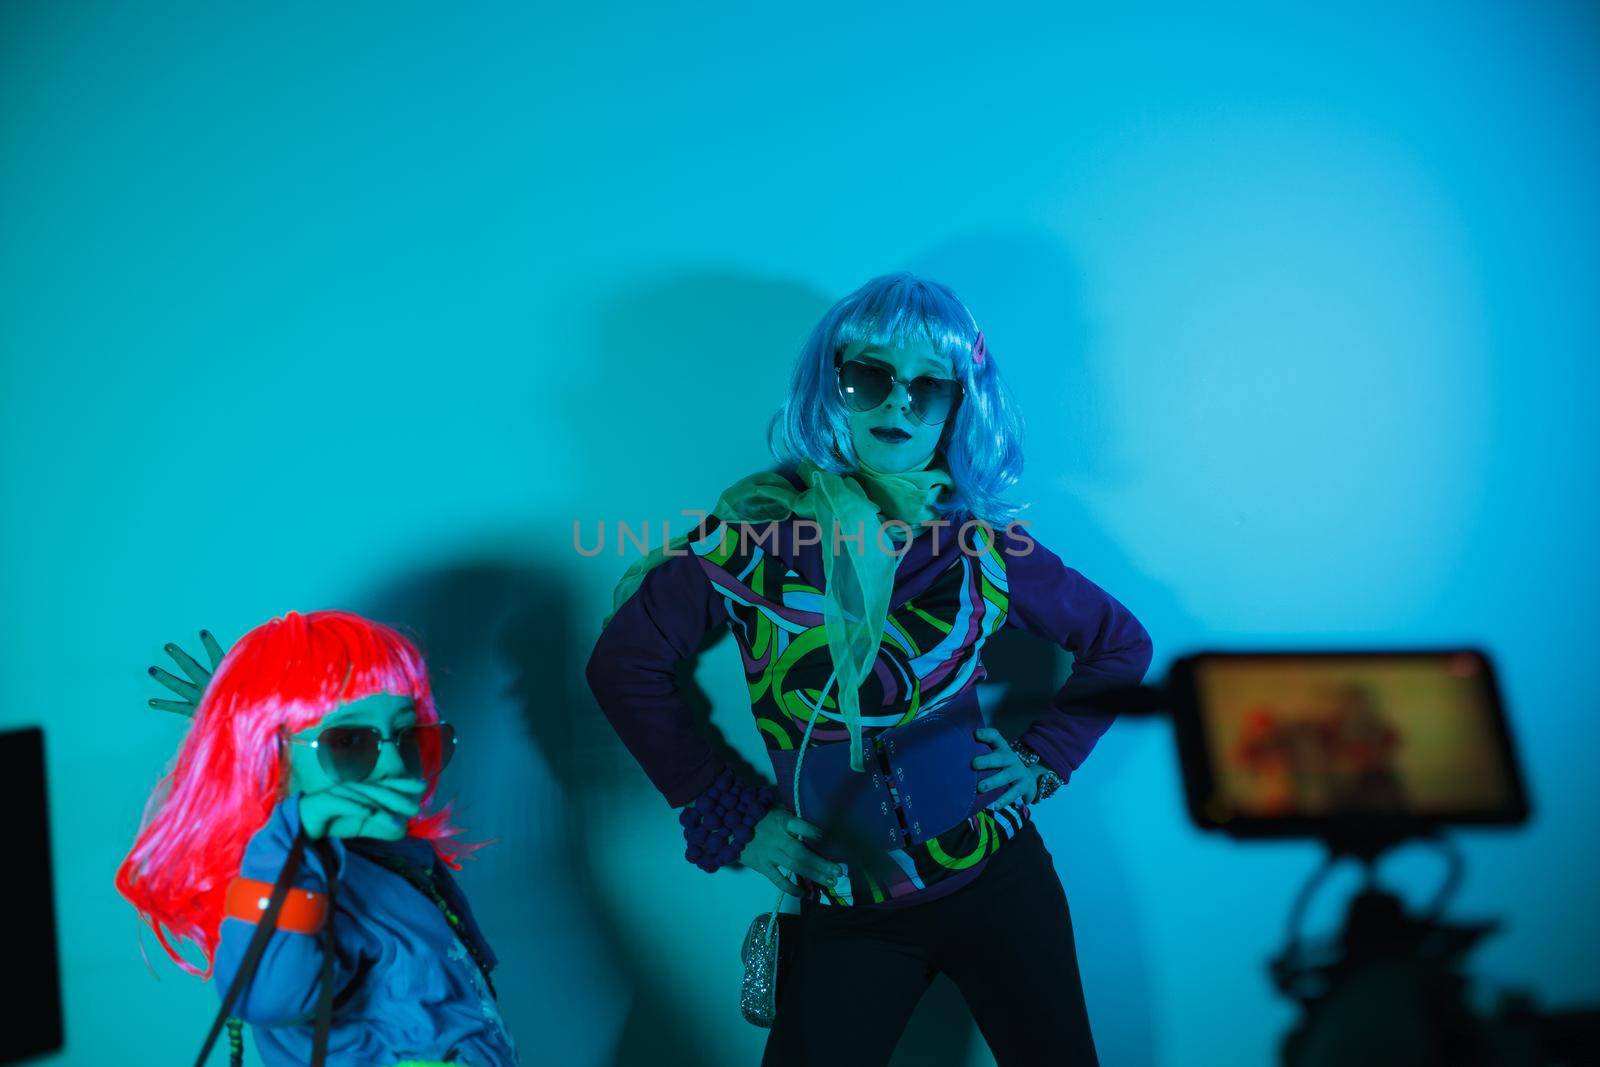 Little girls wearing a colorful wig and heart-shaped sunglasses posed for a photo shooting on the disco light background